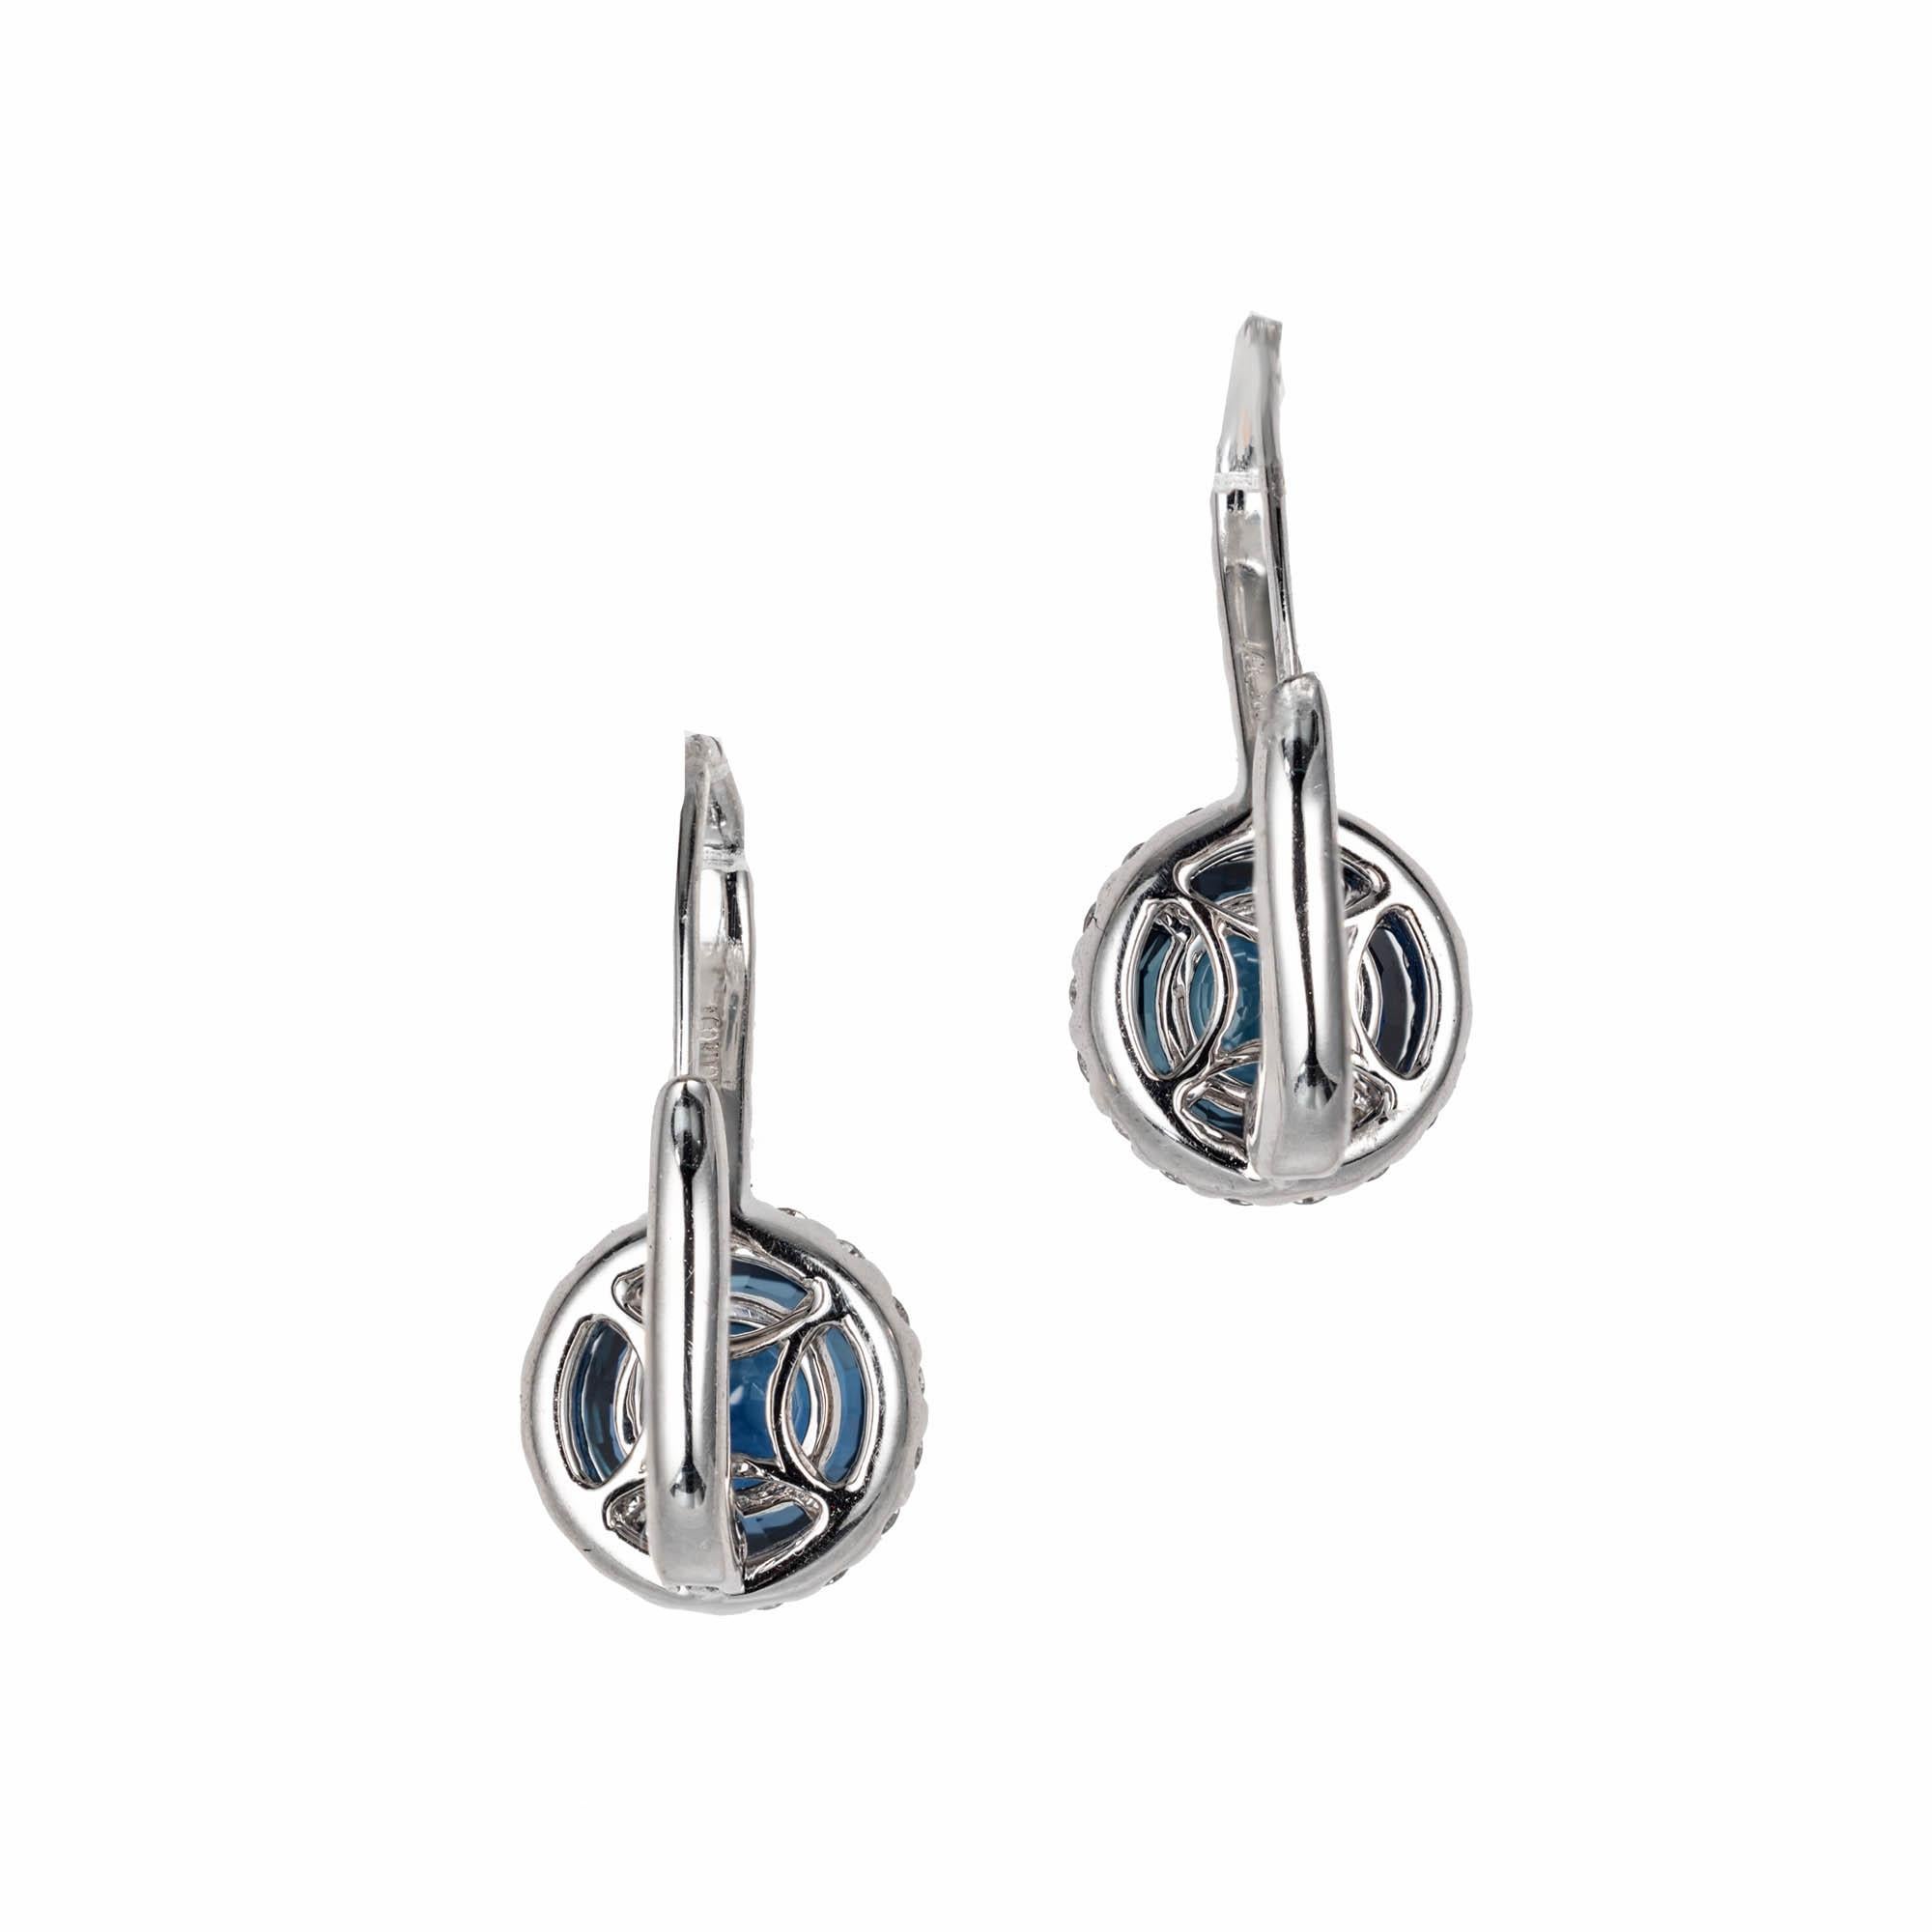 Peter Suchy  sapphire and diamond dangle earrings. Set in 14k white gold. Round sapphire surrounded by a halo of diamonds with diamonds set down front wires. Gia random tested and certified natural no heat sapphire 

2 round blue sapphire,